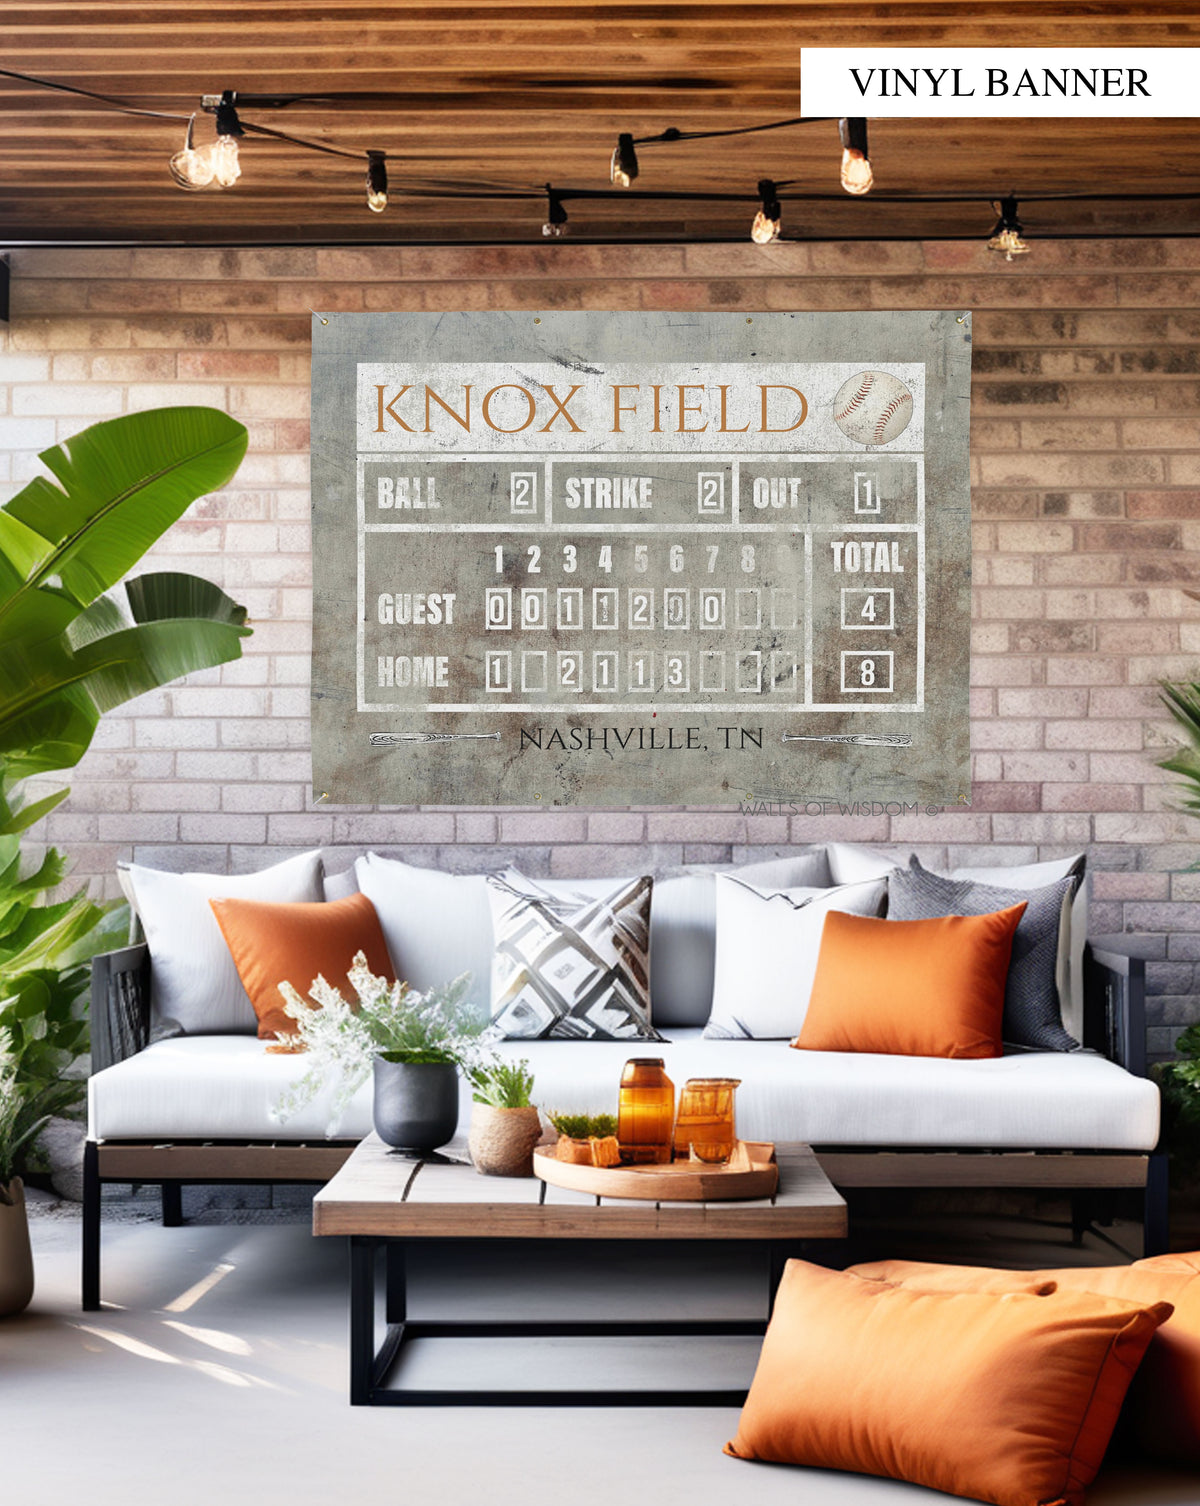 Personalized Baseball Vinyl Banner: Add a unique, vintage touch to your space with a customizable, high-quality baseball sign.